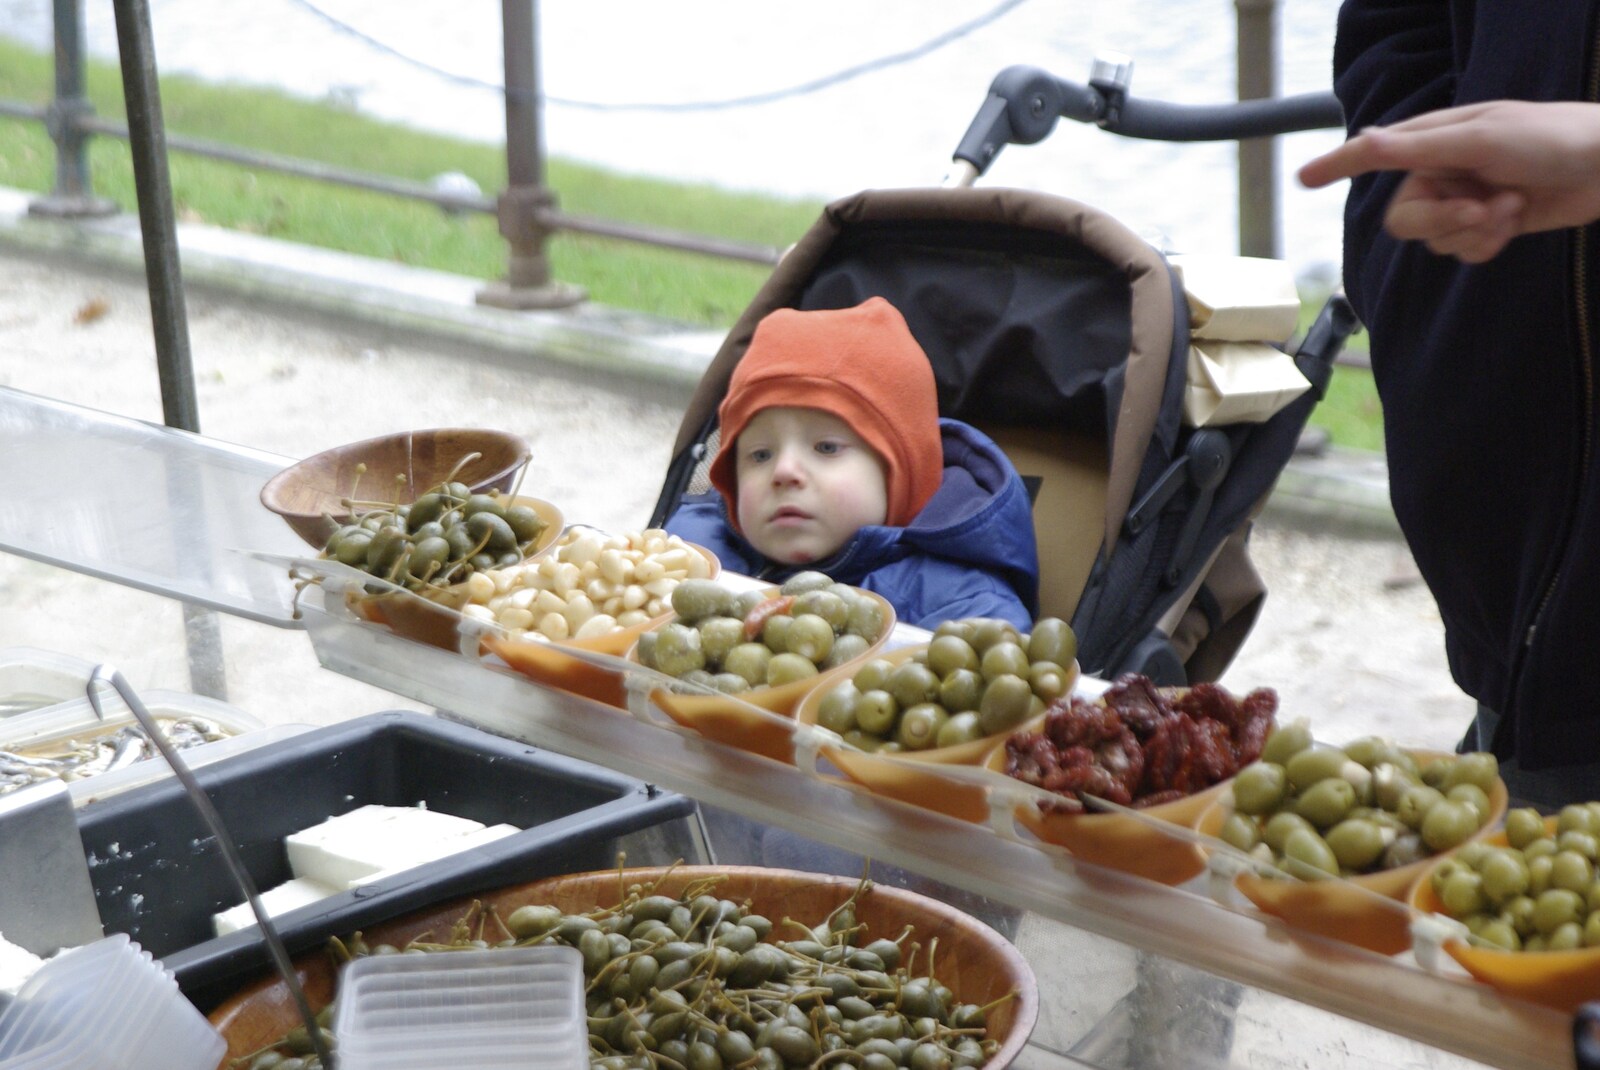 Kai looks at olives from The Christmas Markets of Brussels, Belgium - 1st January 2007